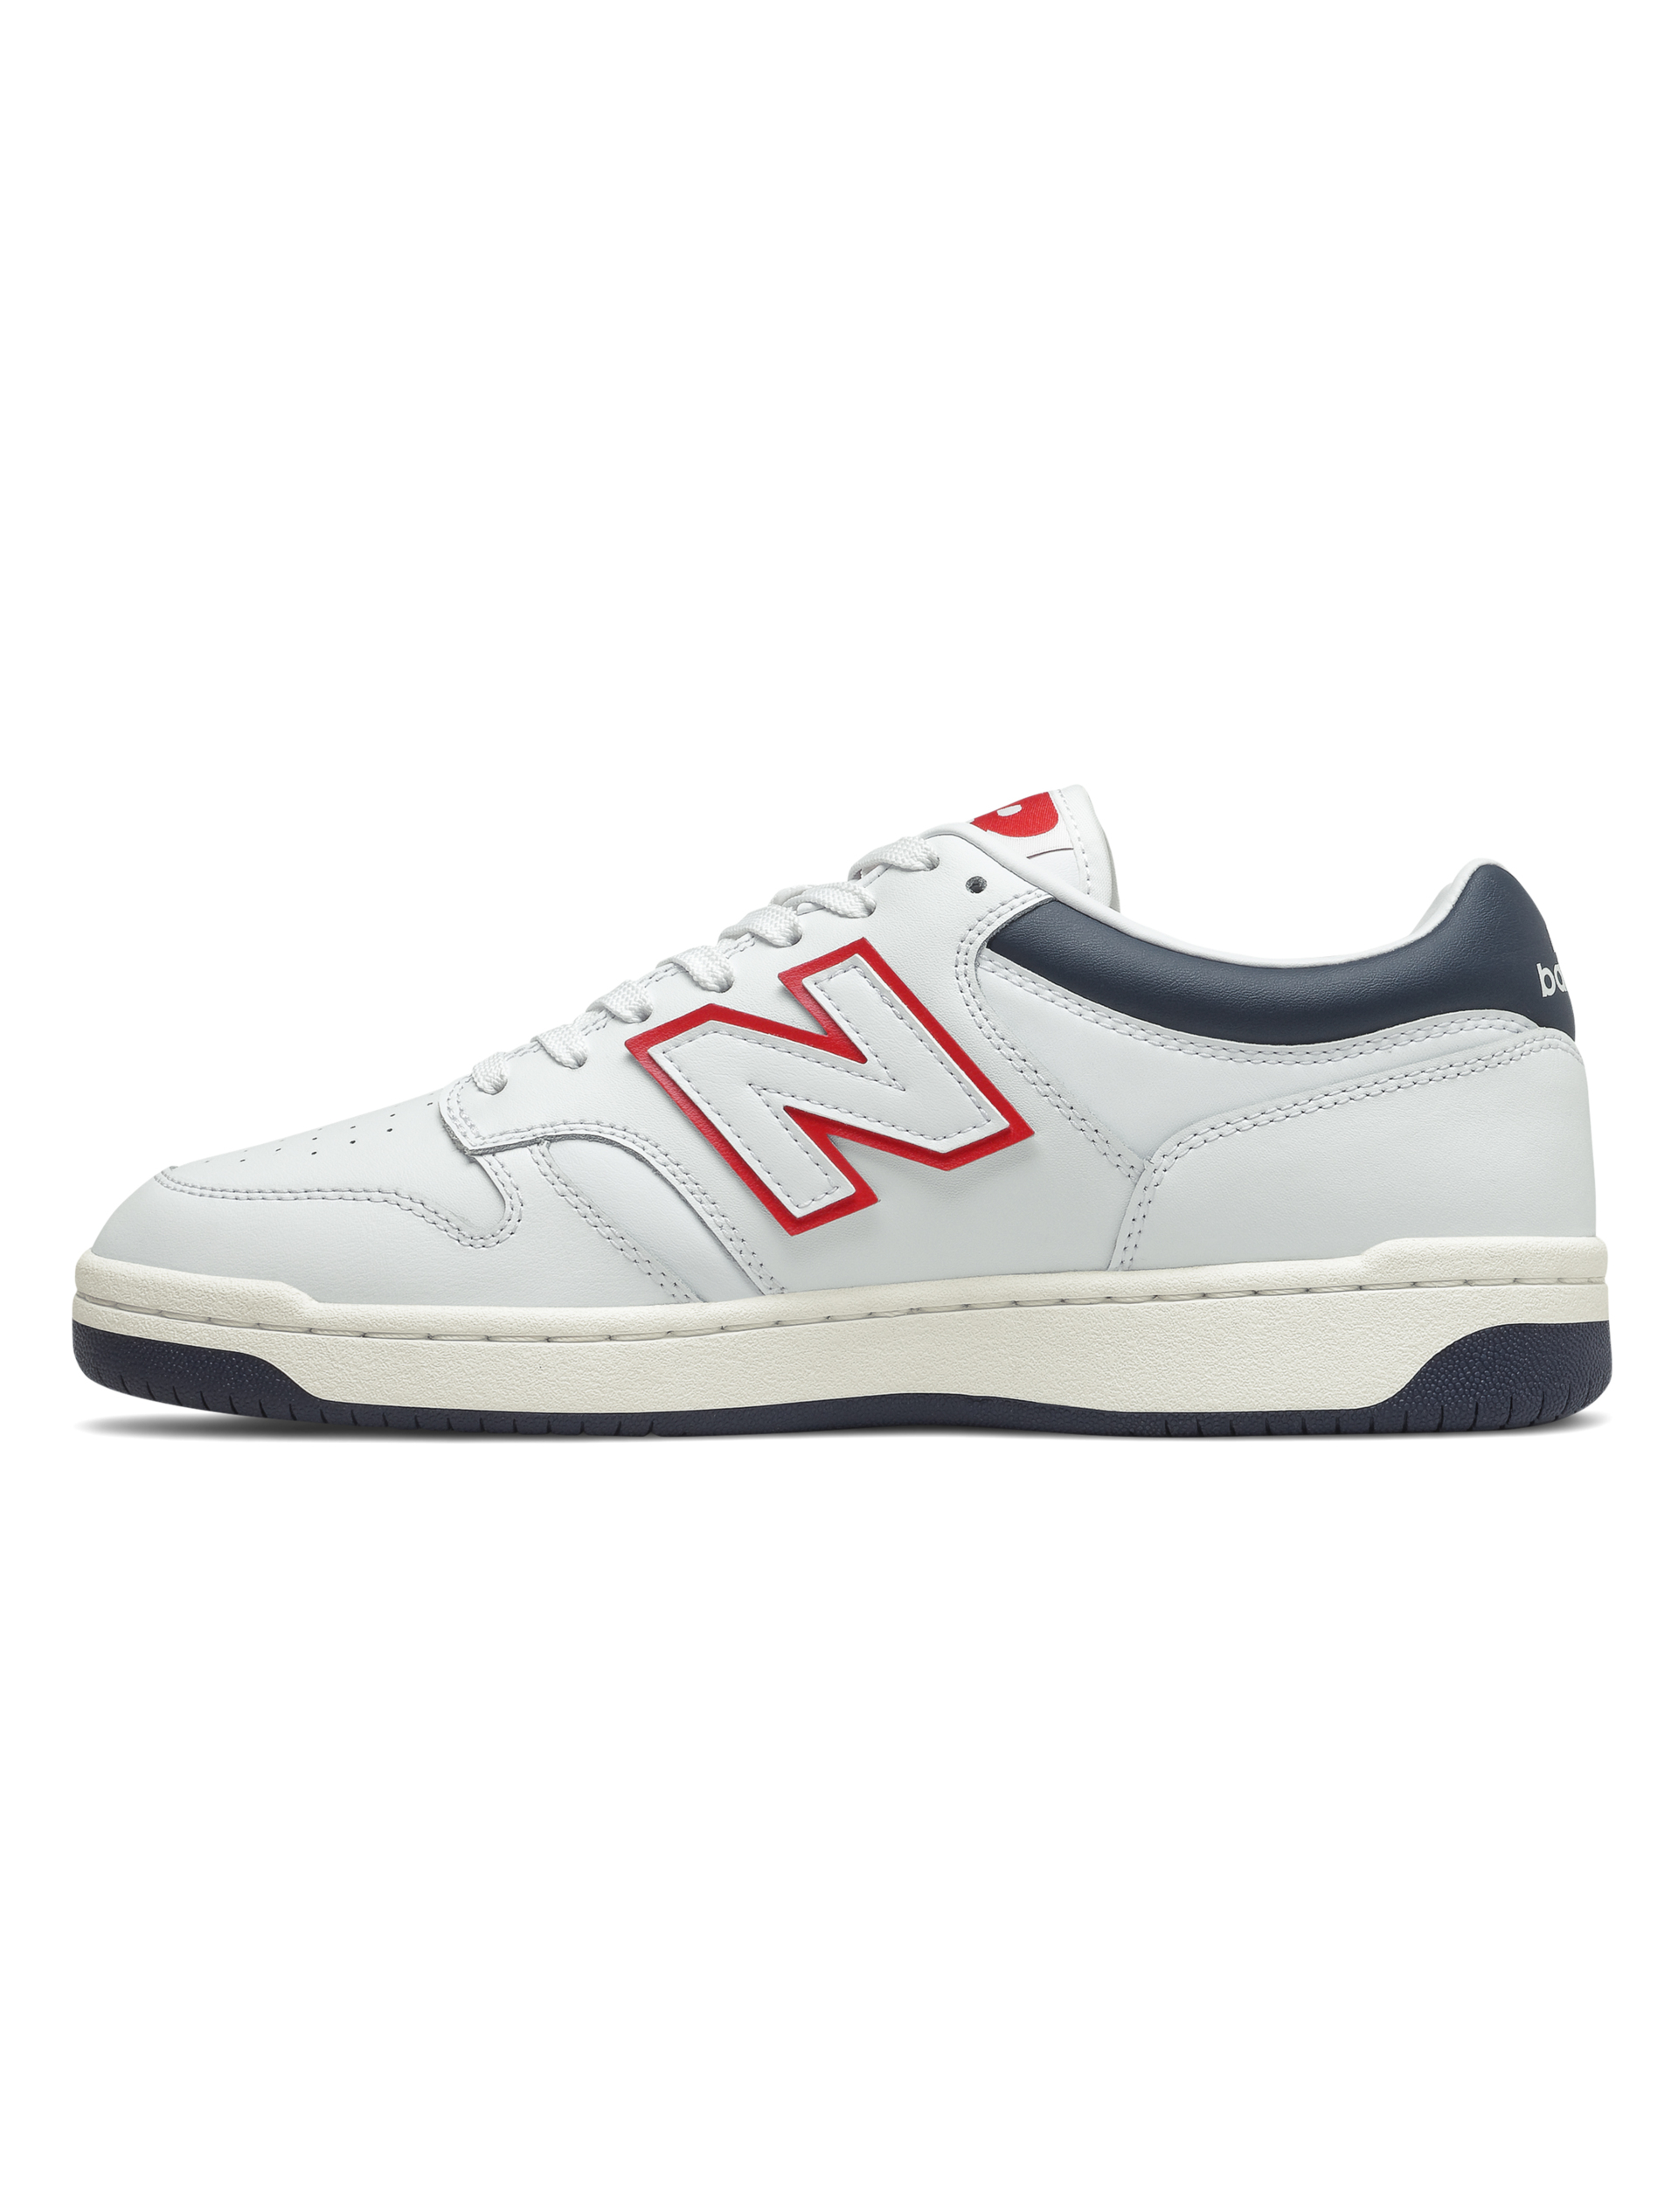 New Balance Sneakers hvid / lwg white red